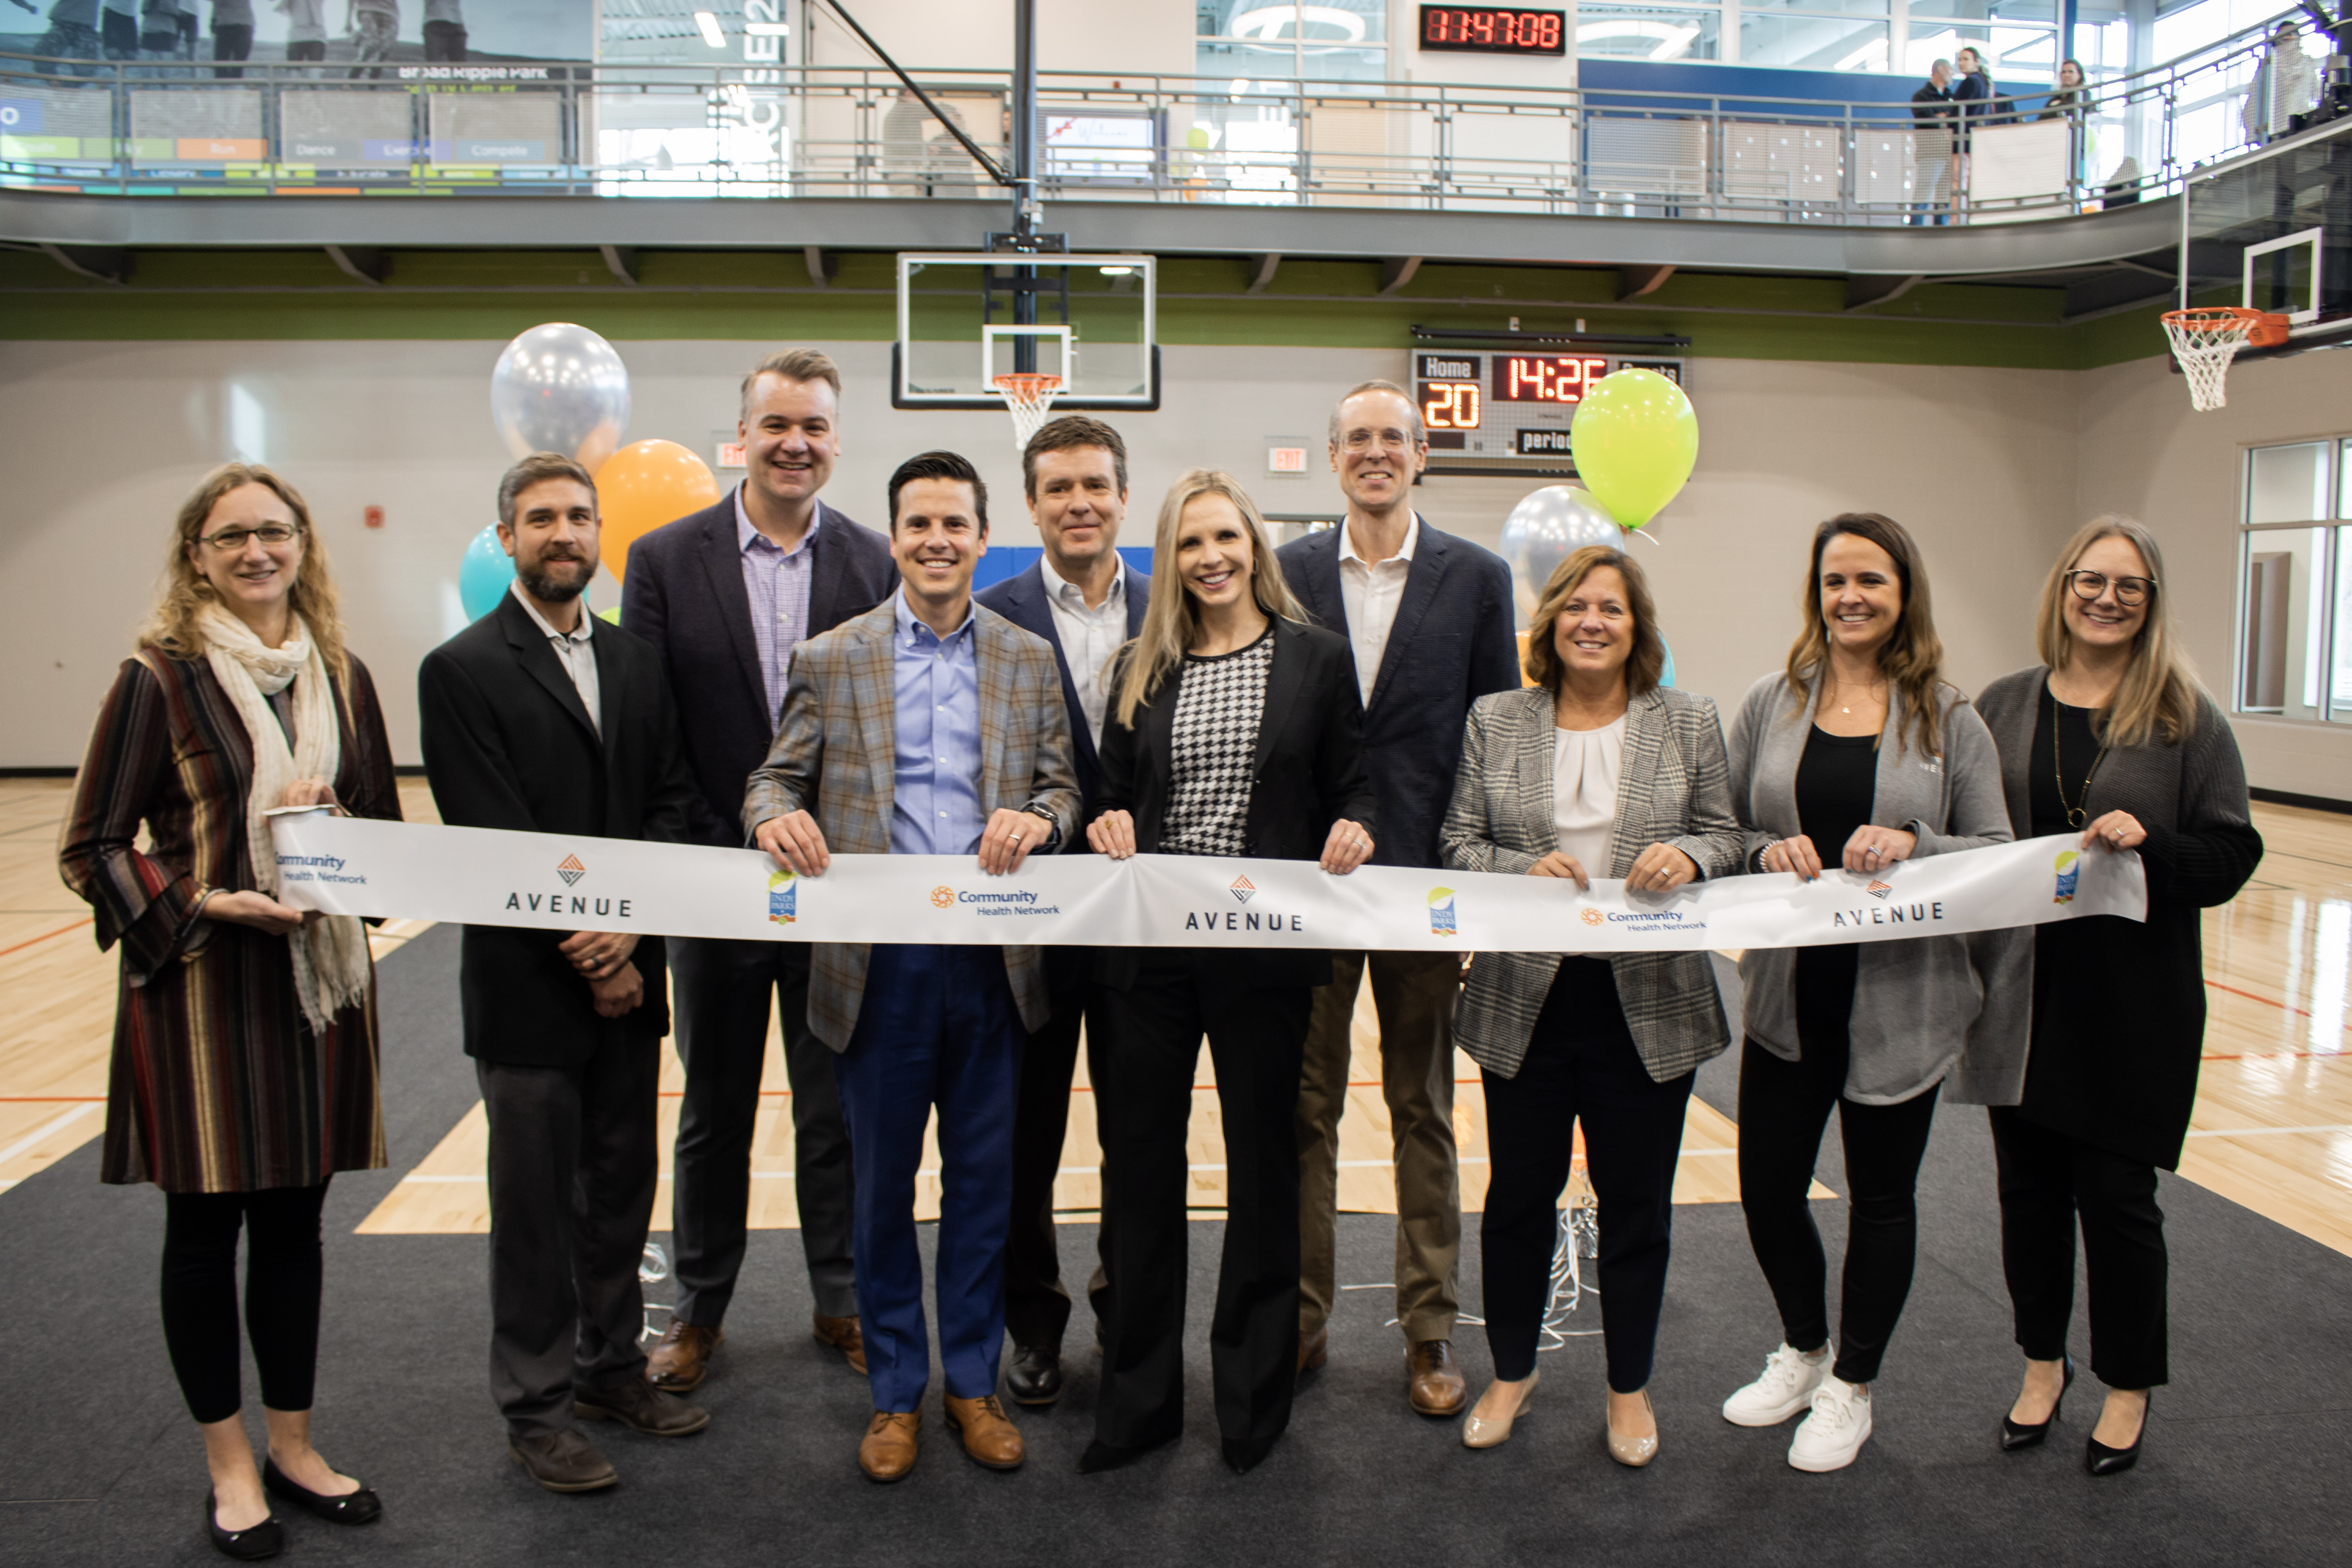 Team Avenue celebrates grand opening at Broad Ripple Family Park